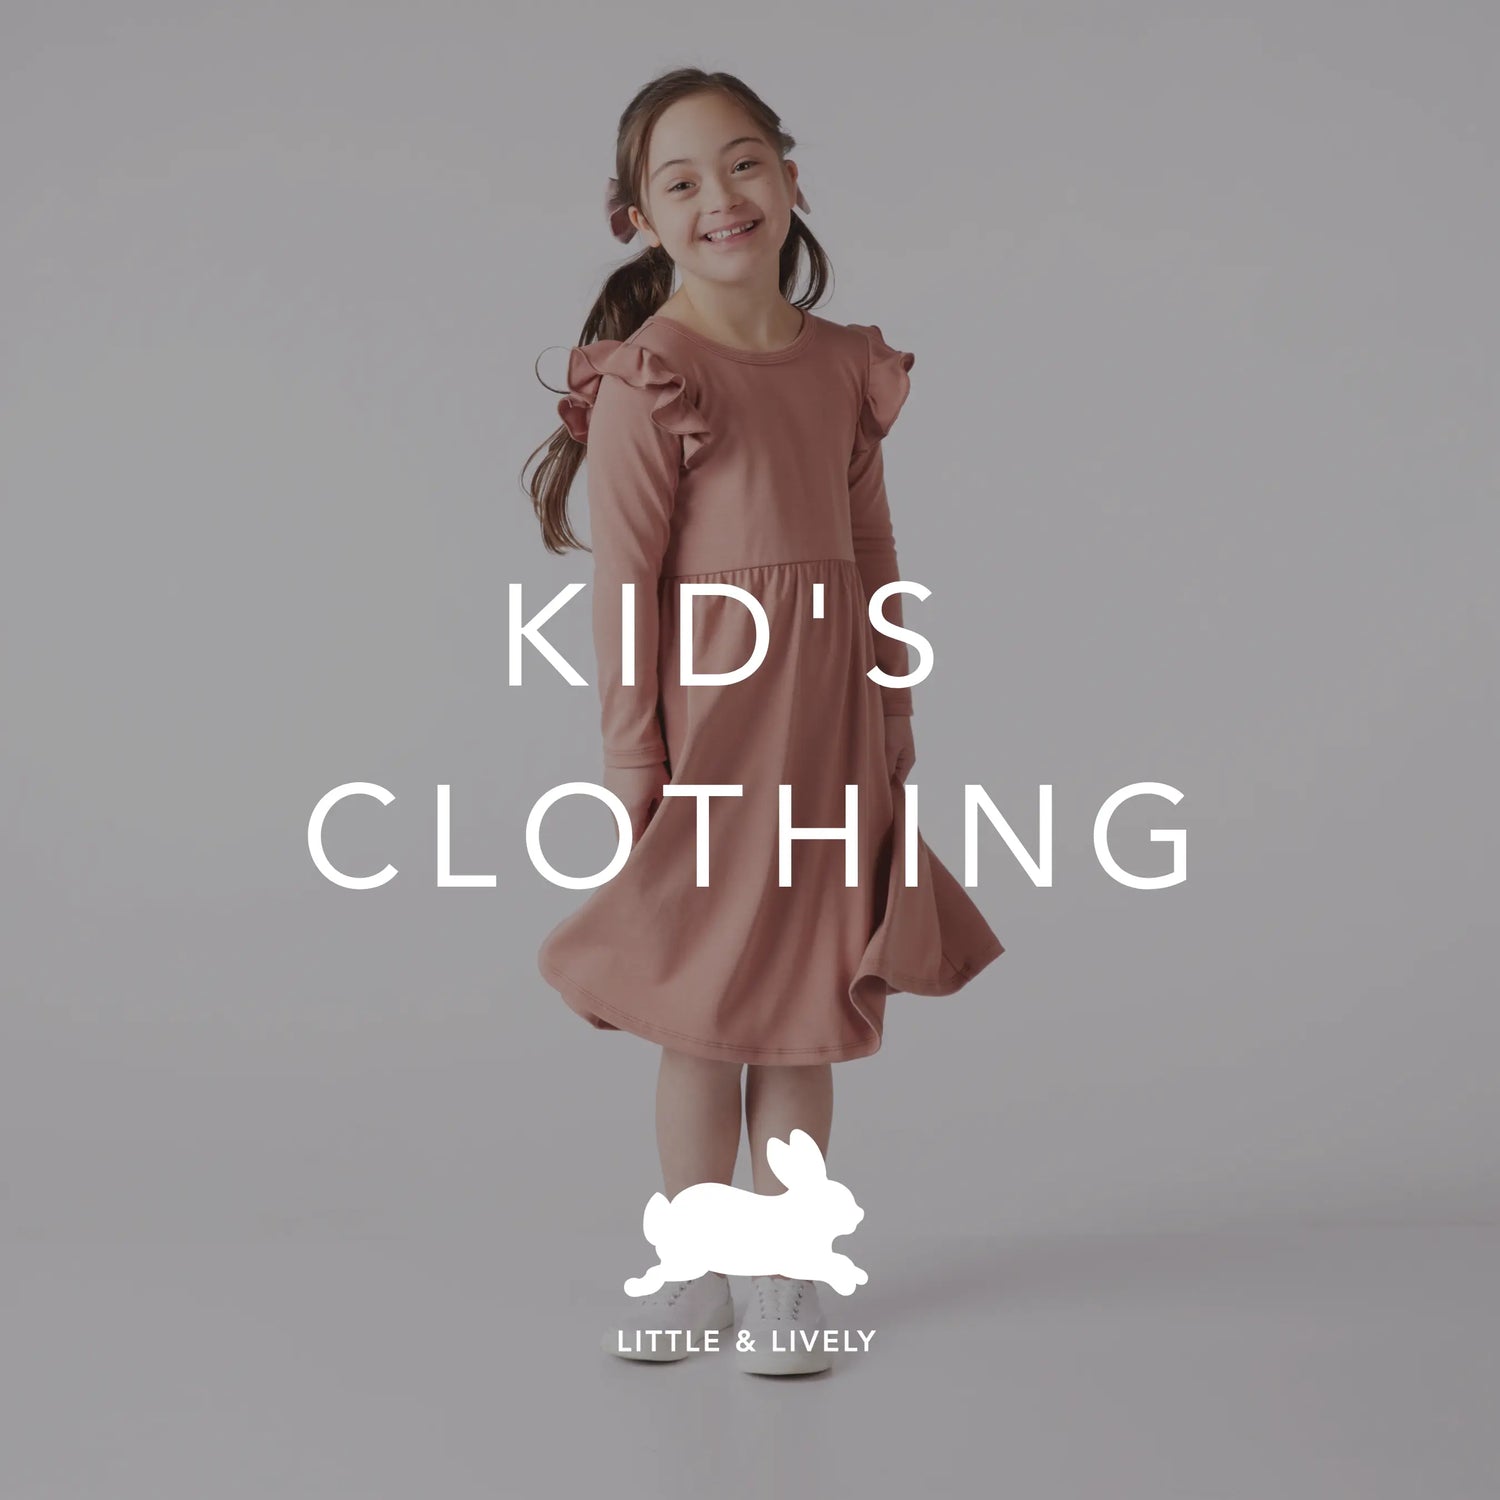 TOP 10 BEST Children's Clothing near Cañon City, CO - Updated